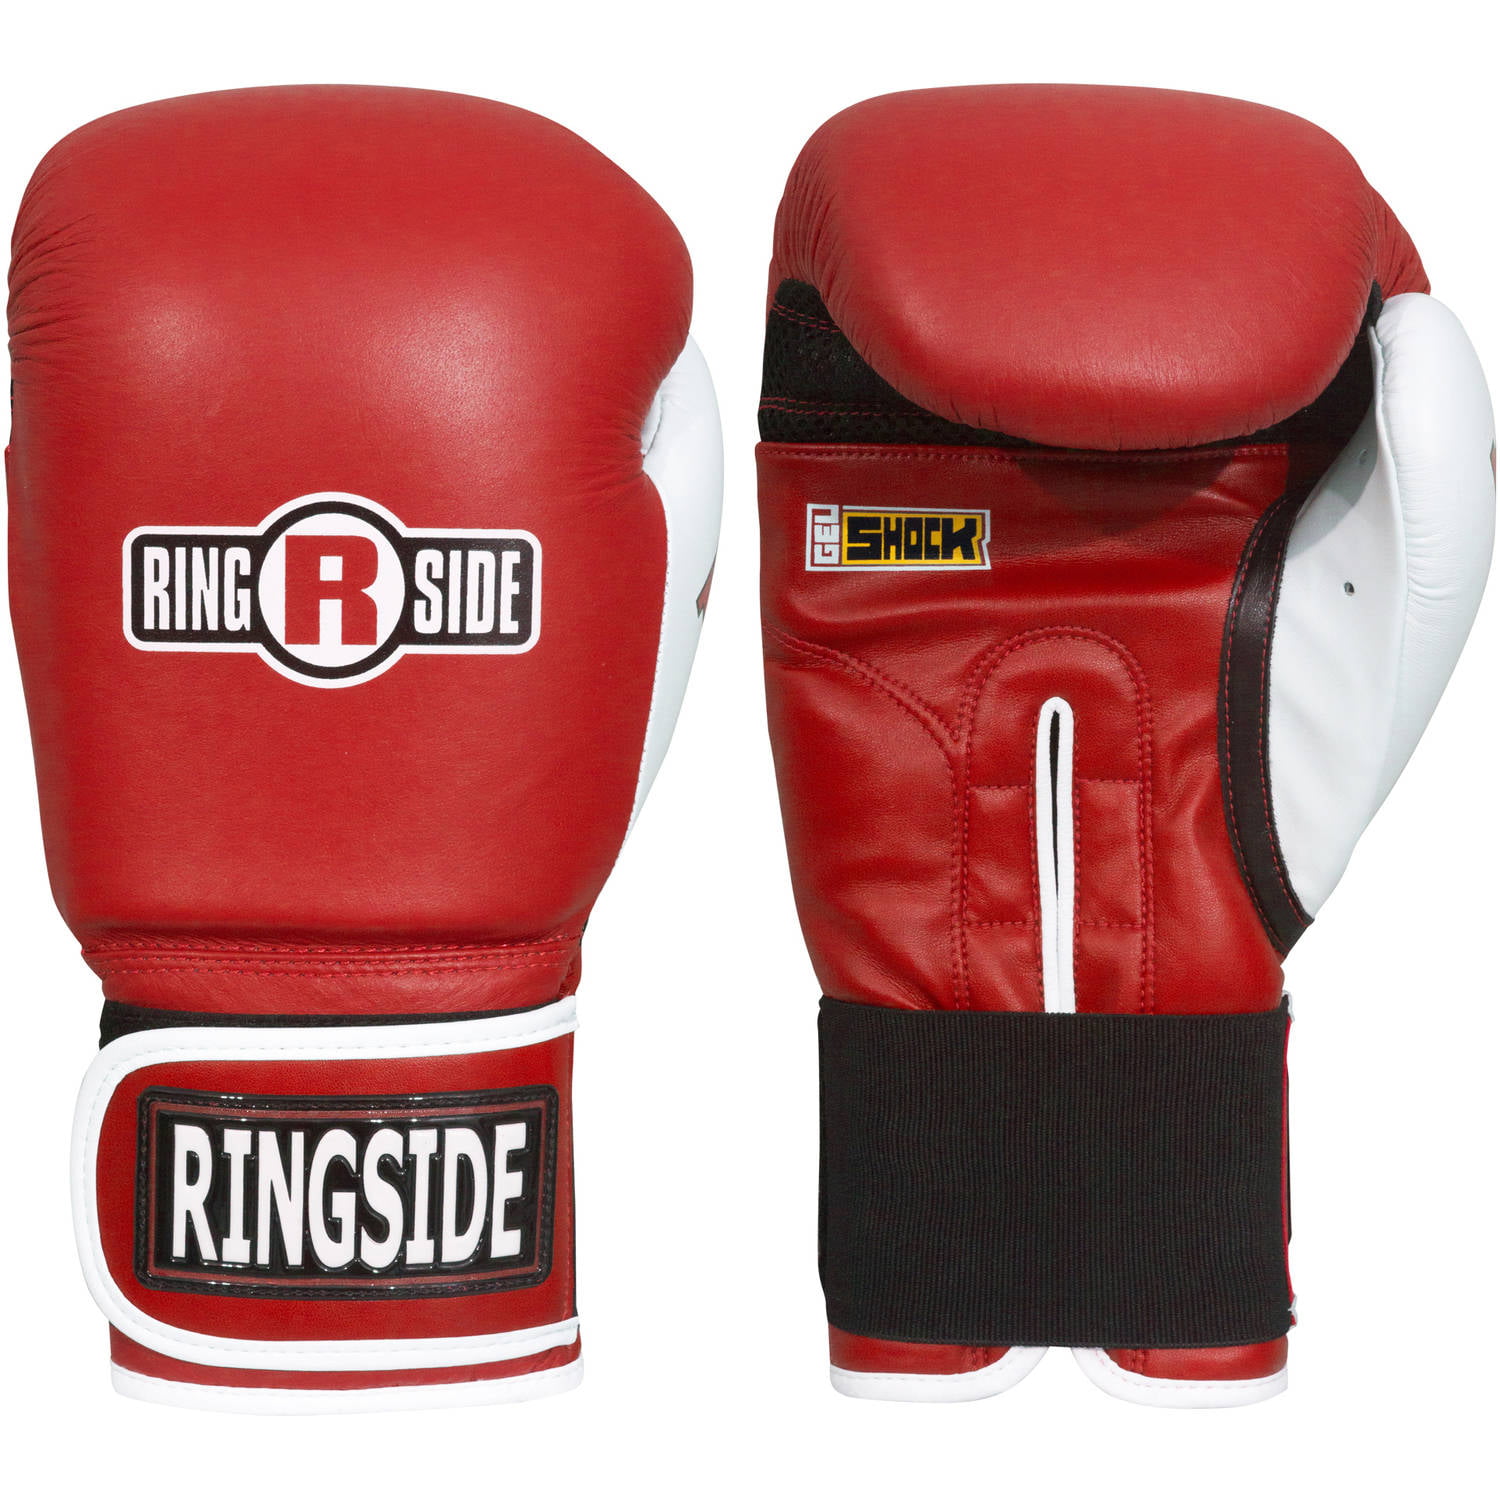 Details about   Contender Fight Sports Boxing Training Gloves 